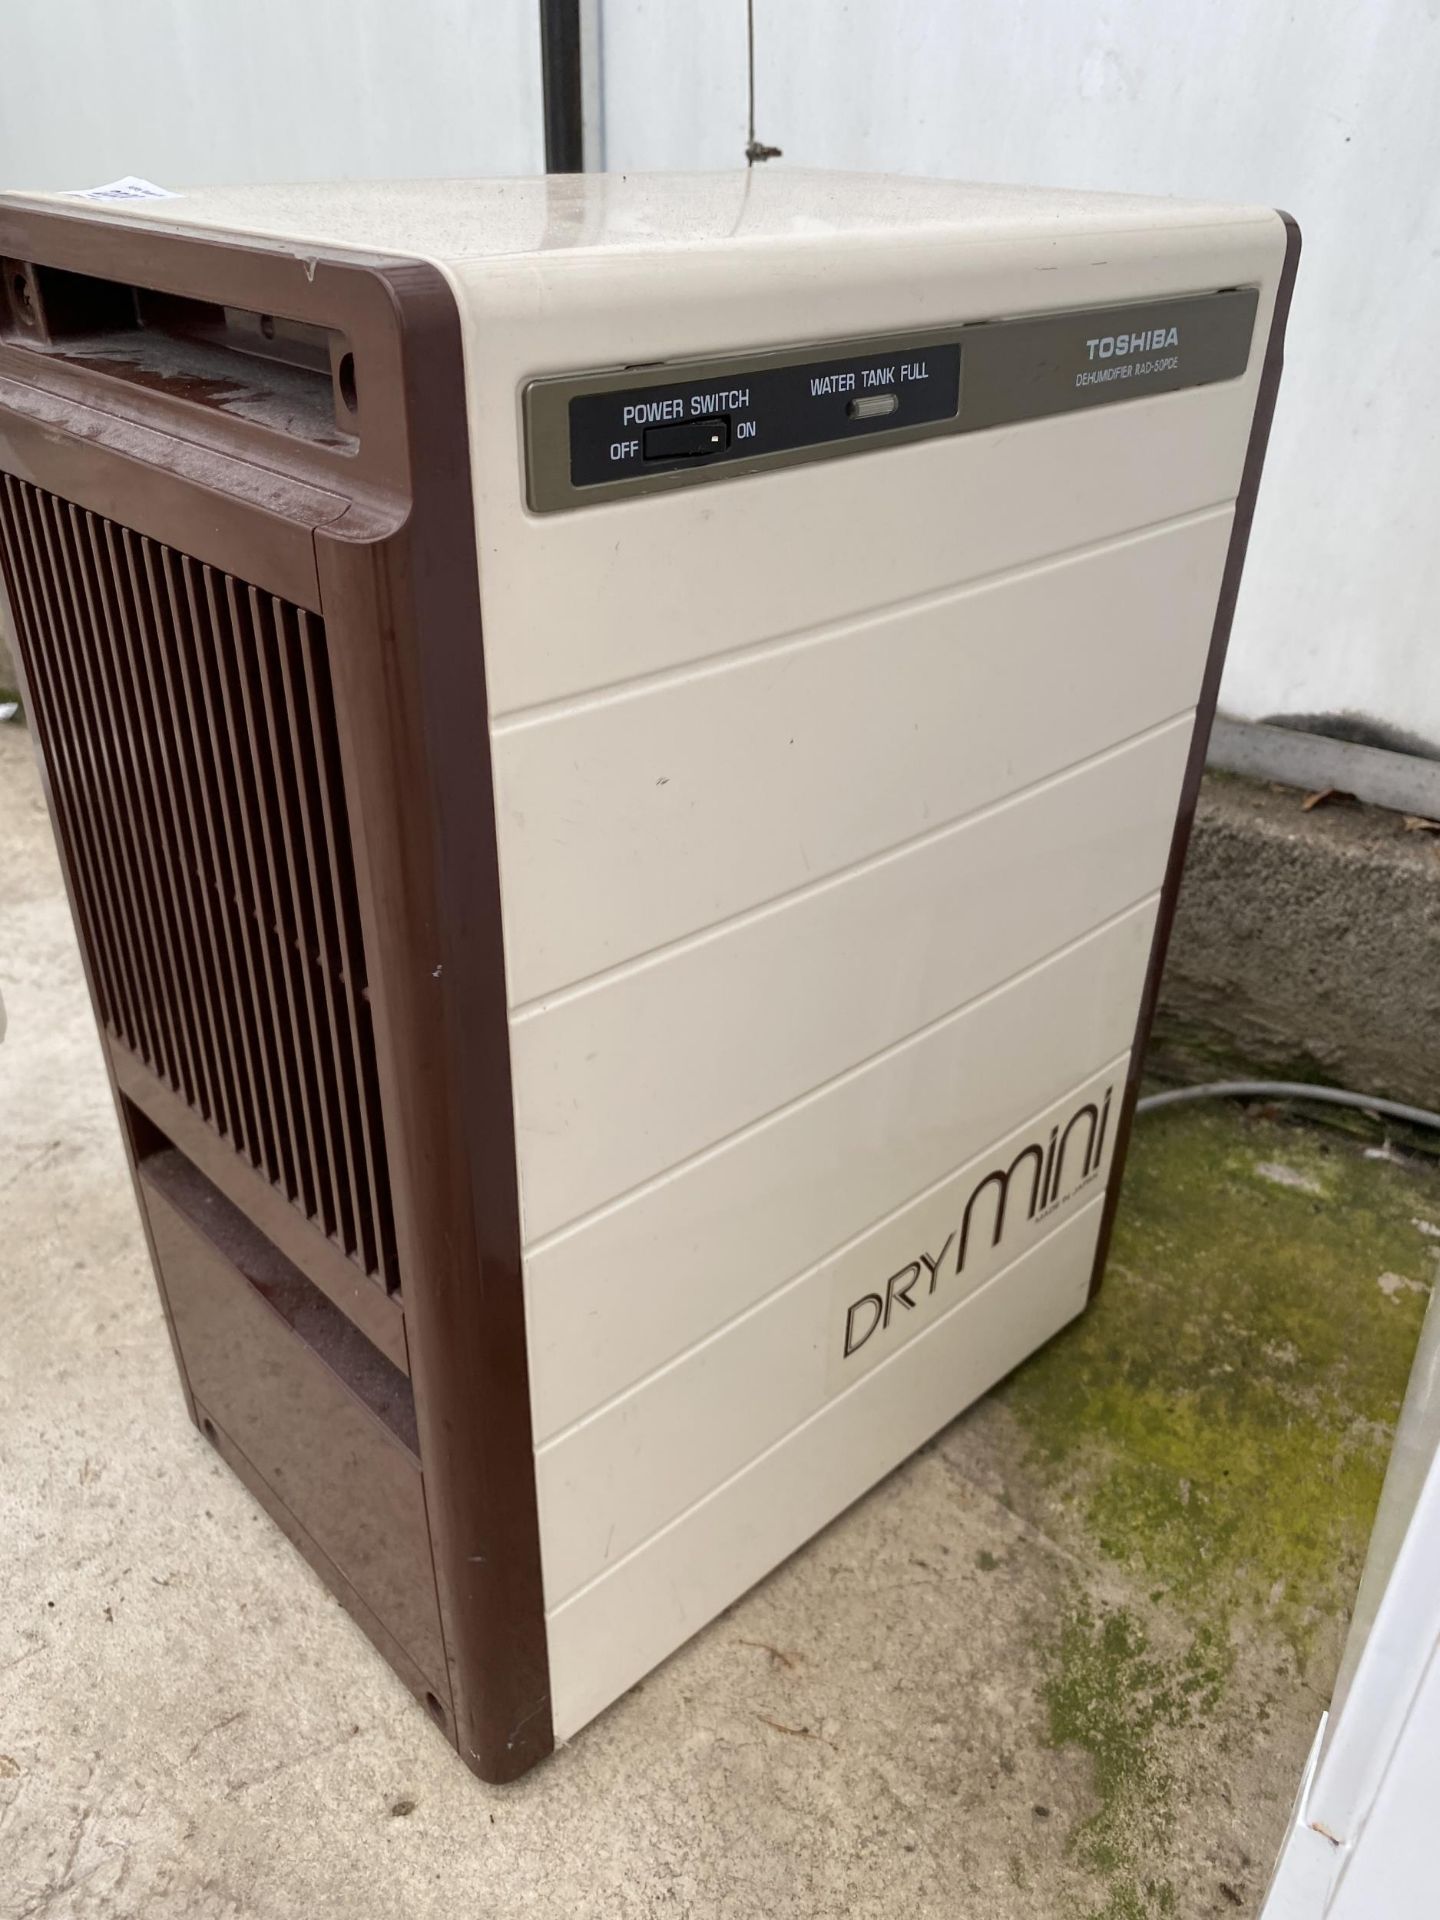 A SMALL CREAM AND BROWN DEHUMIDIFIER - Image 2 of 2